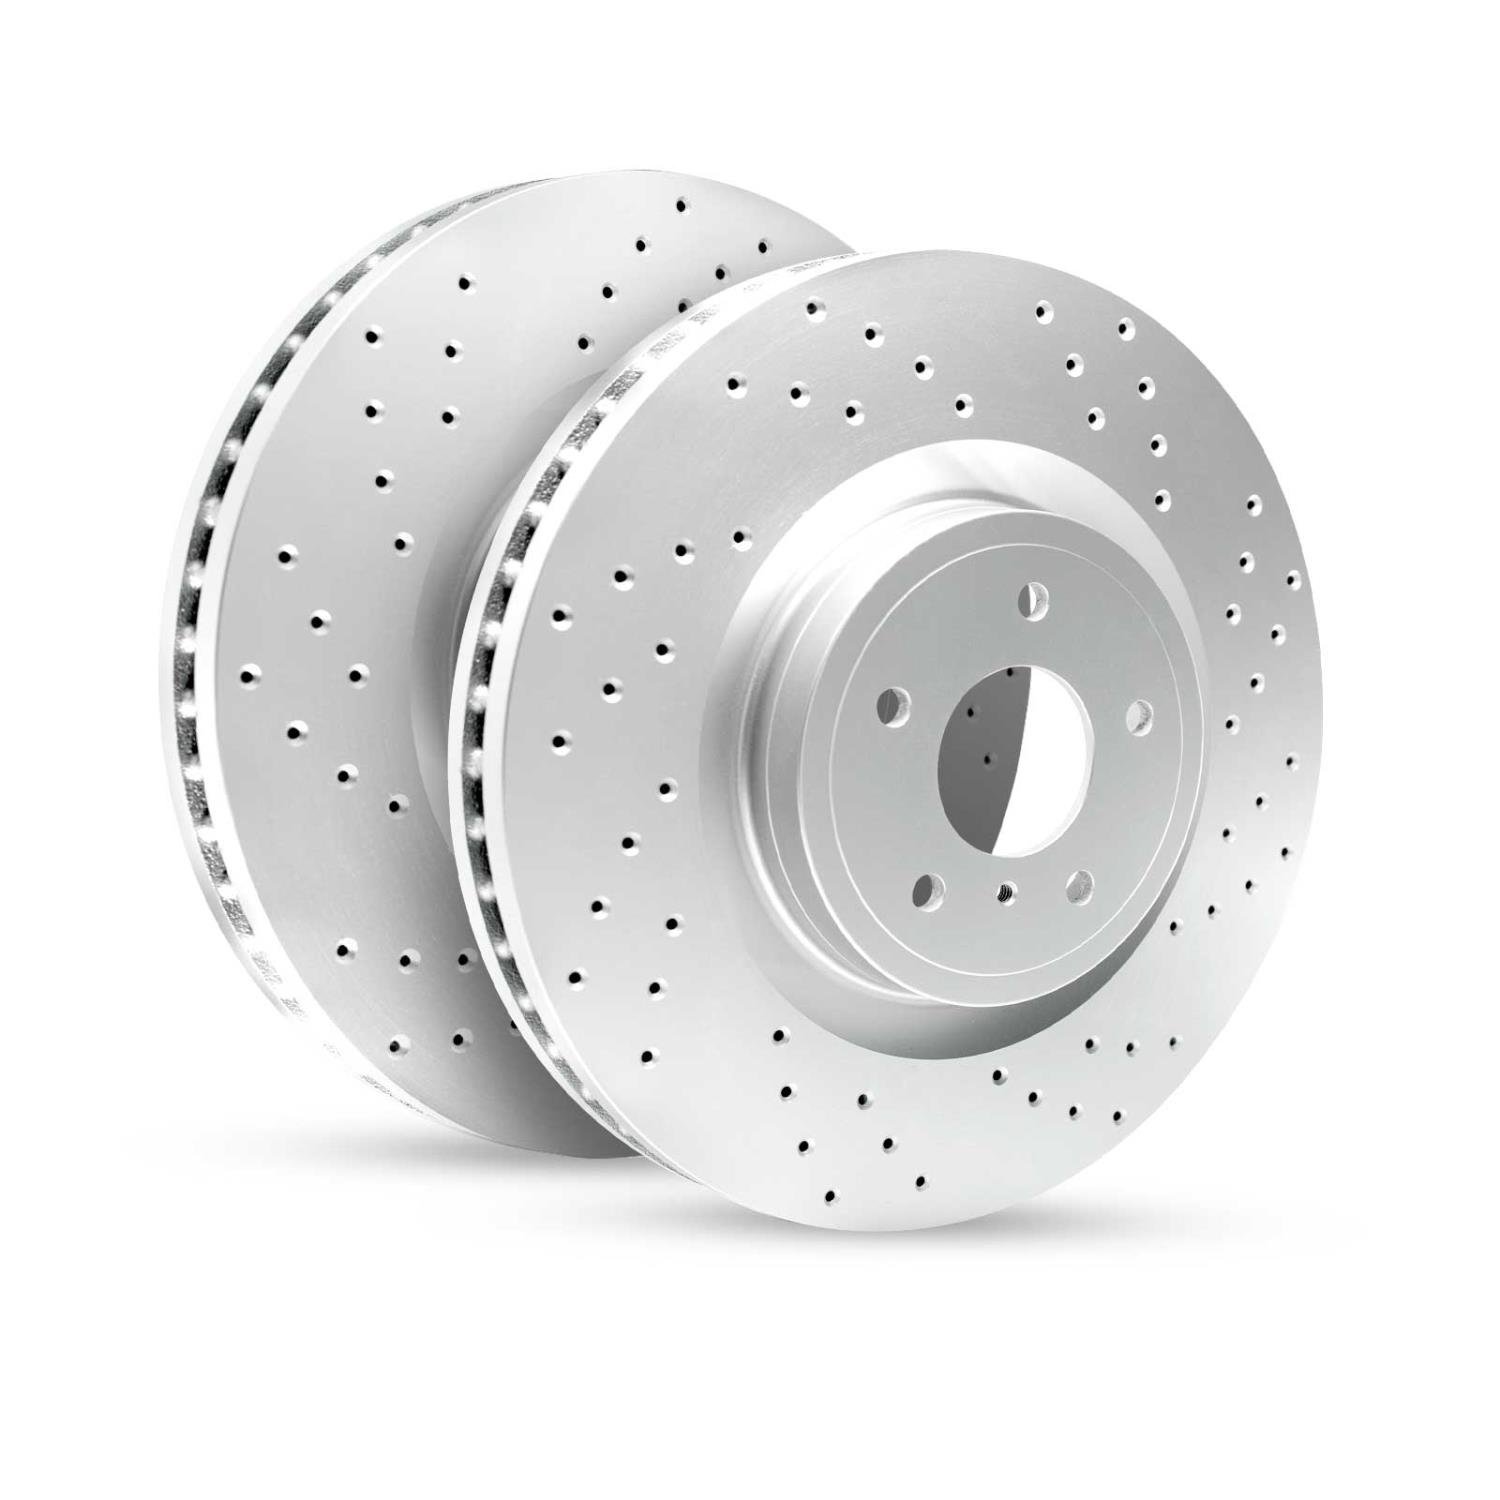 GEO-Carbon Drilled/Slotted Rotors, 1994-2007 Fits Multiple